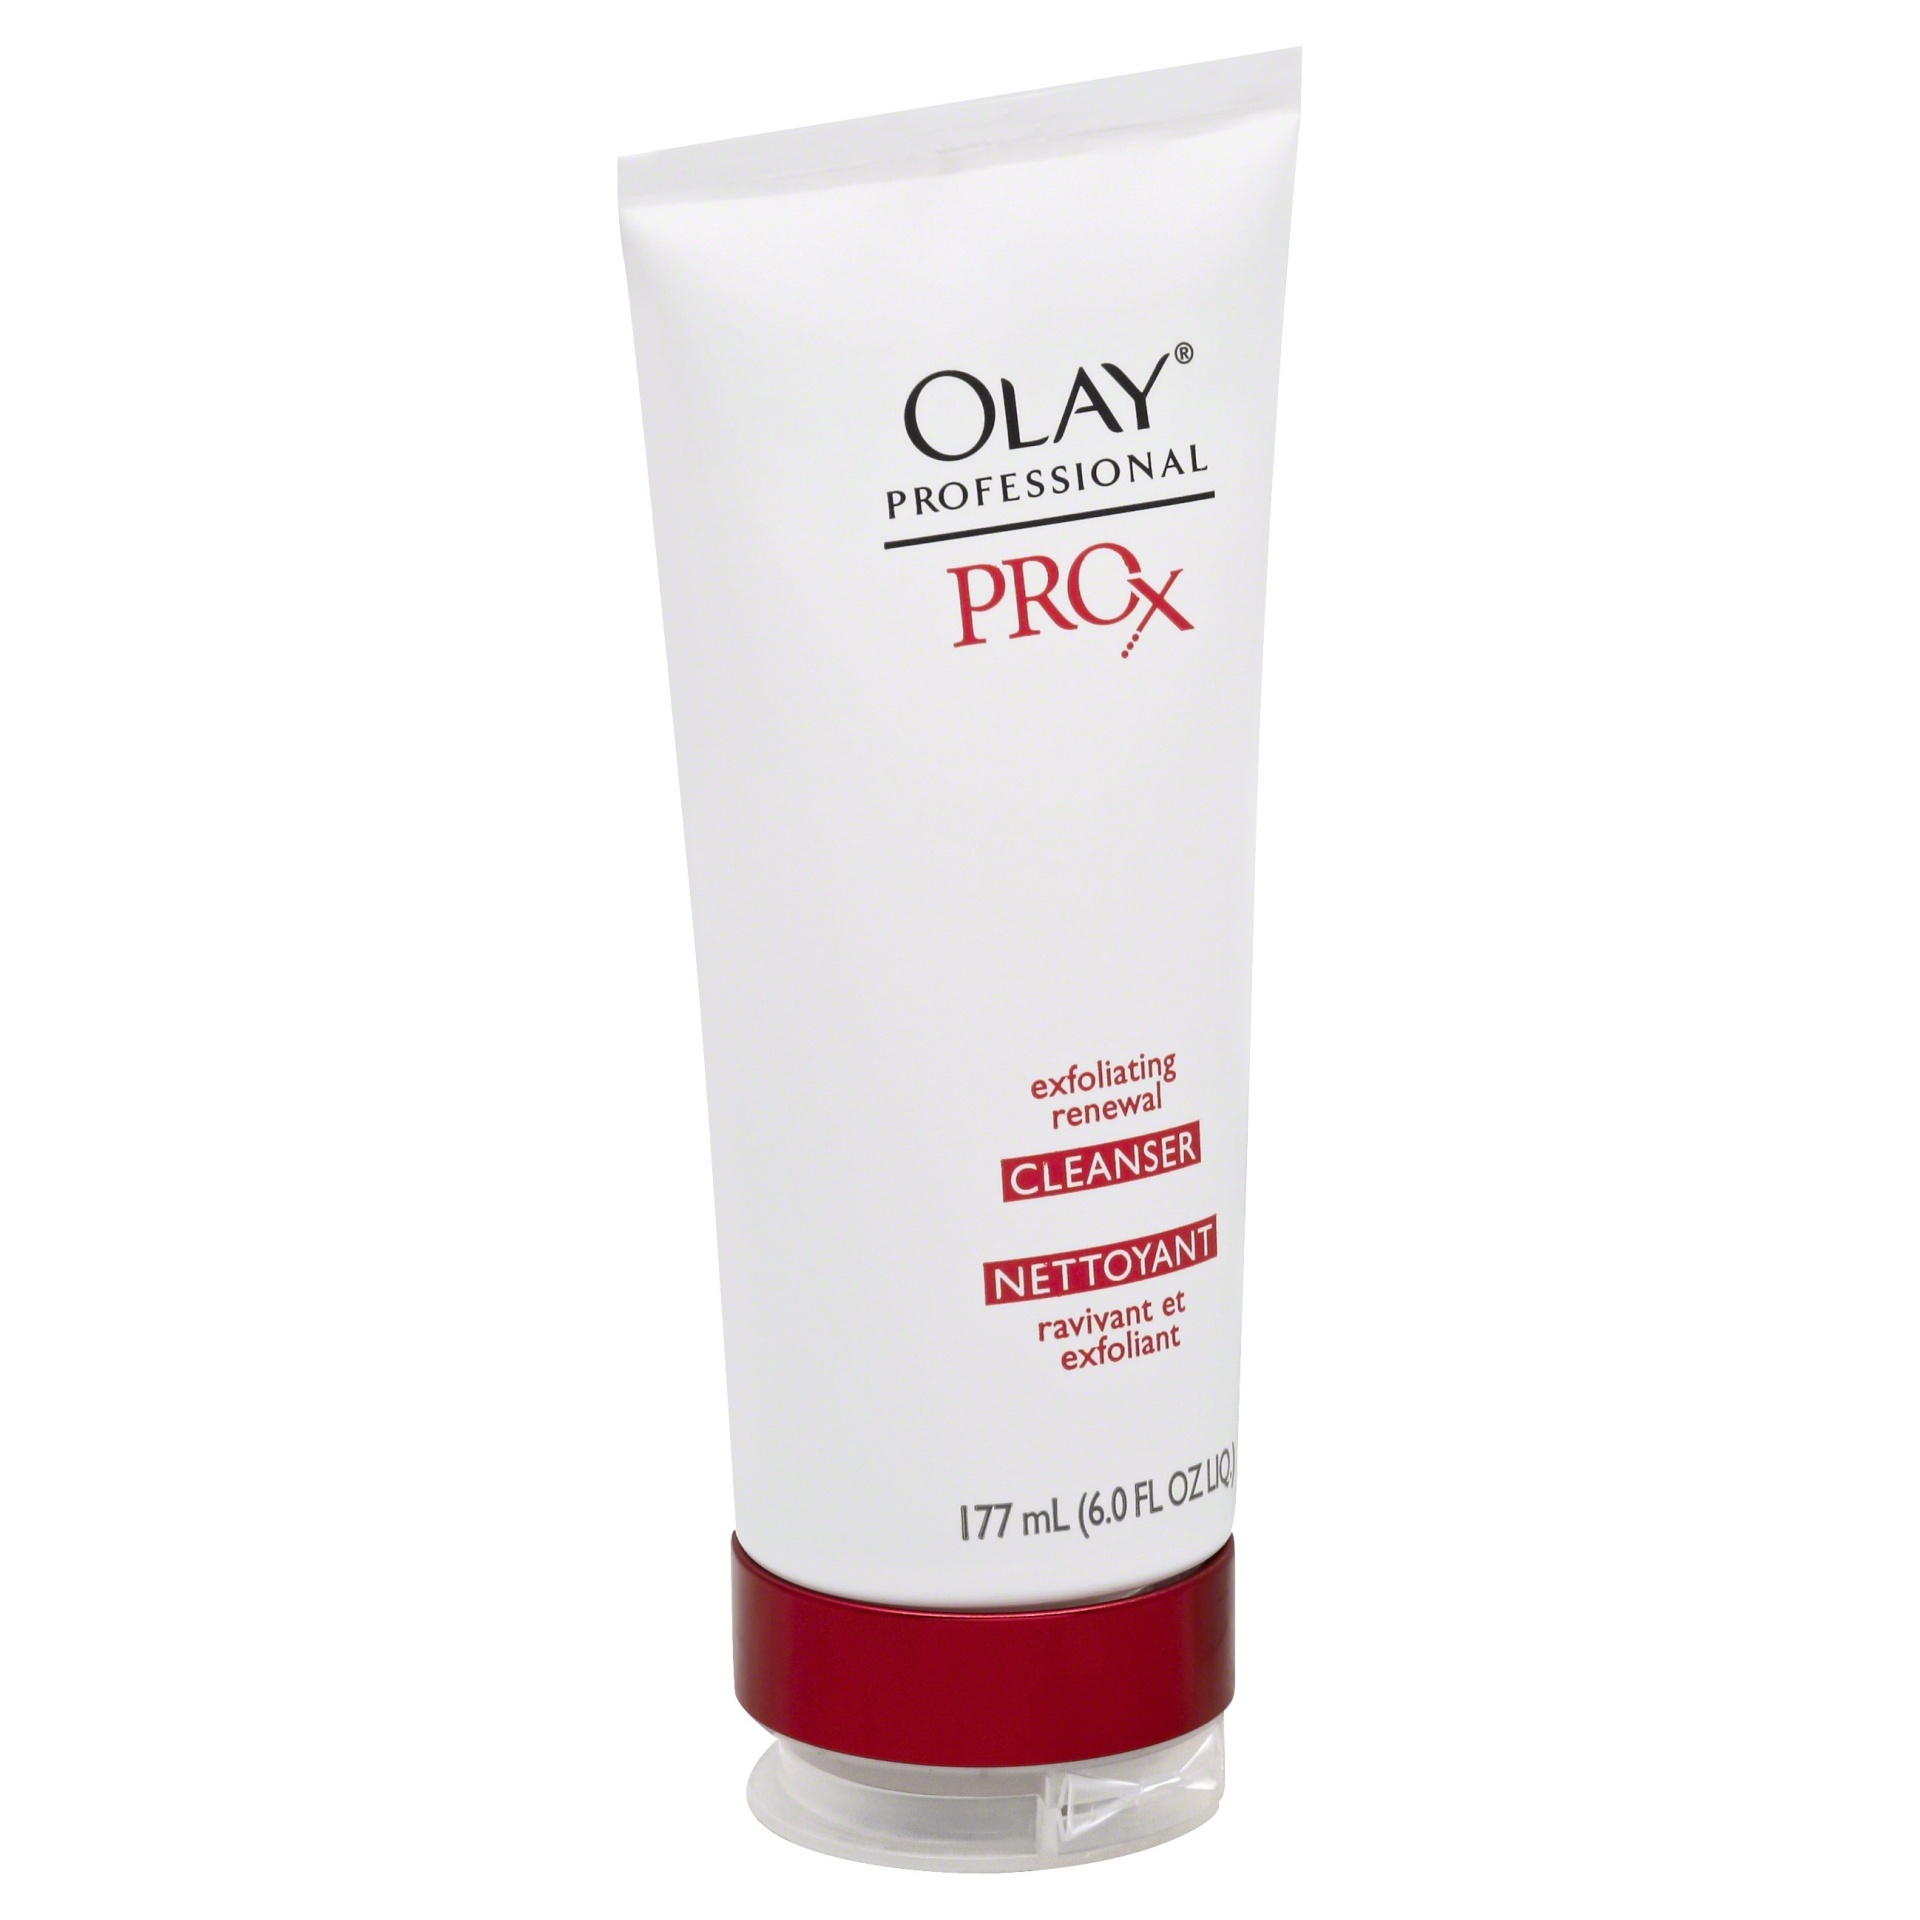 slide 1 of 1, Olay Prox by Exfoliating Renewal Facial Cleanser, 6 oz